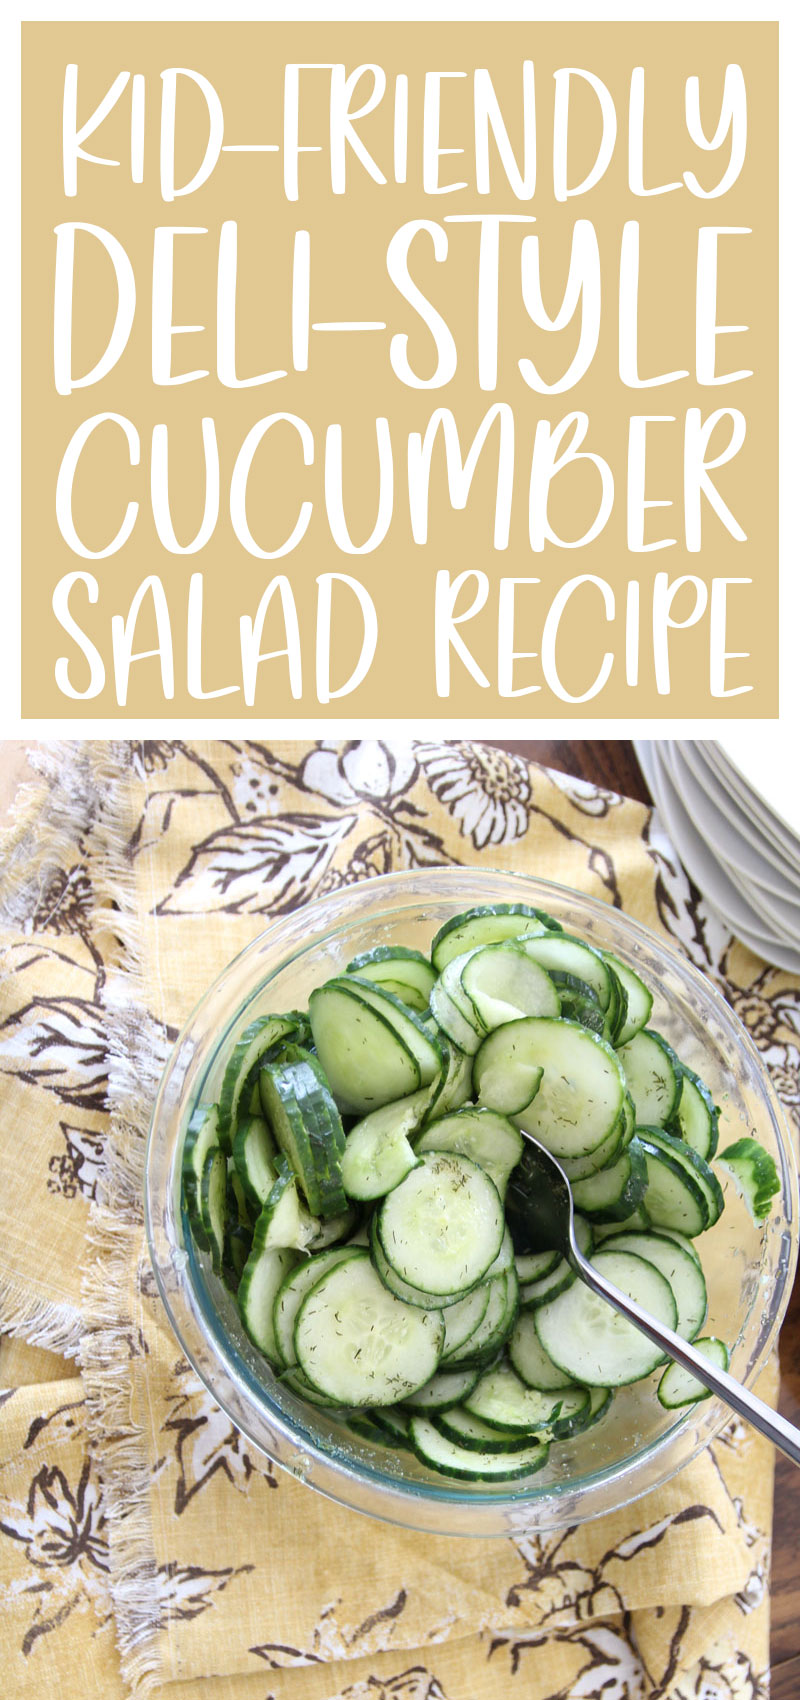 kid friendly cucumber salad recipe with vinegar and dill - title image with text